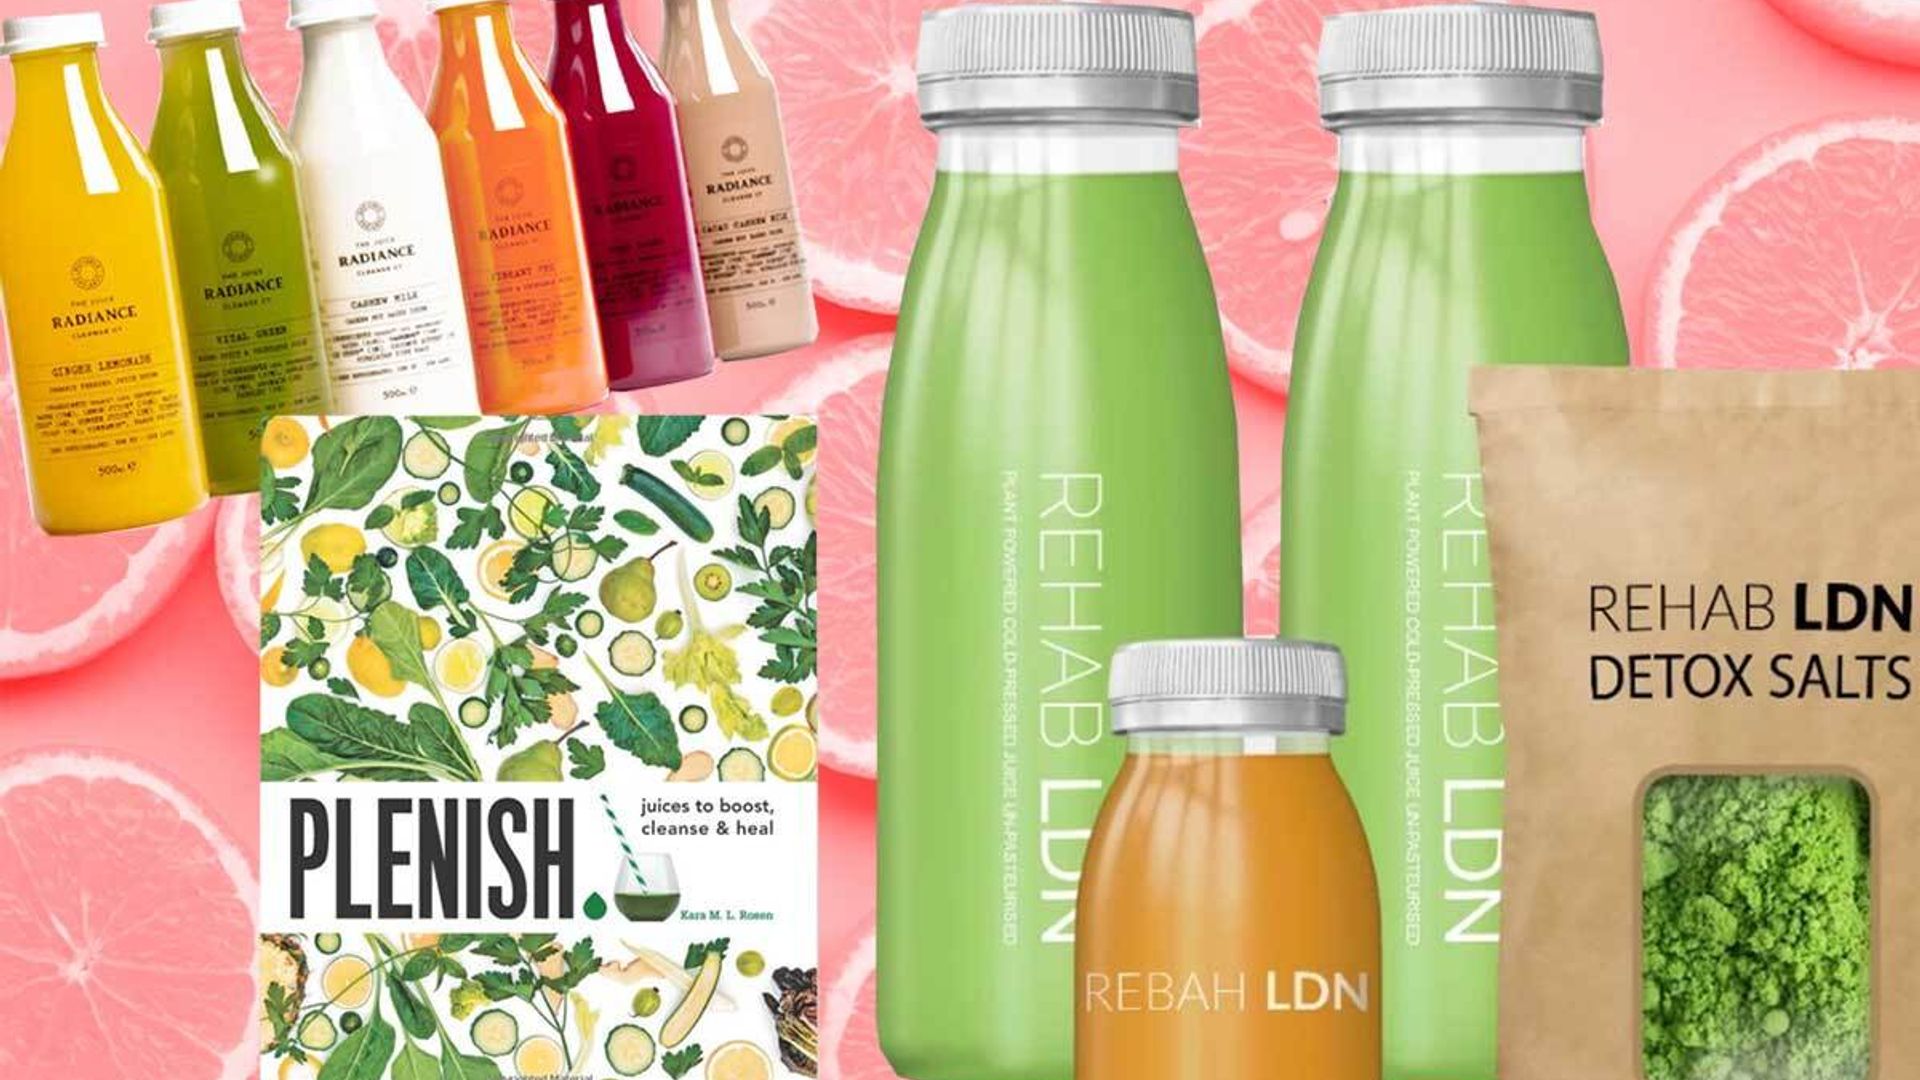 8 best juice cleanses to try: From an immune-boosting detox to celebrity-favourite cleanse